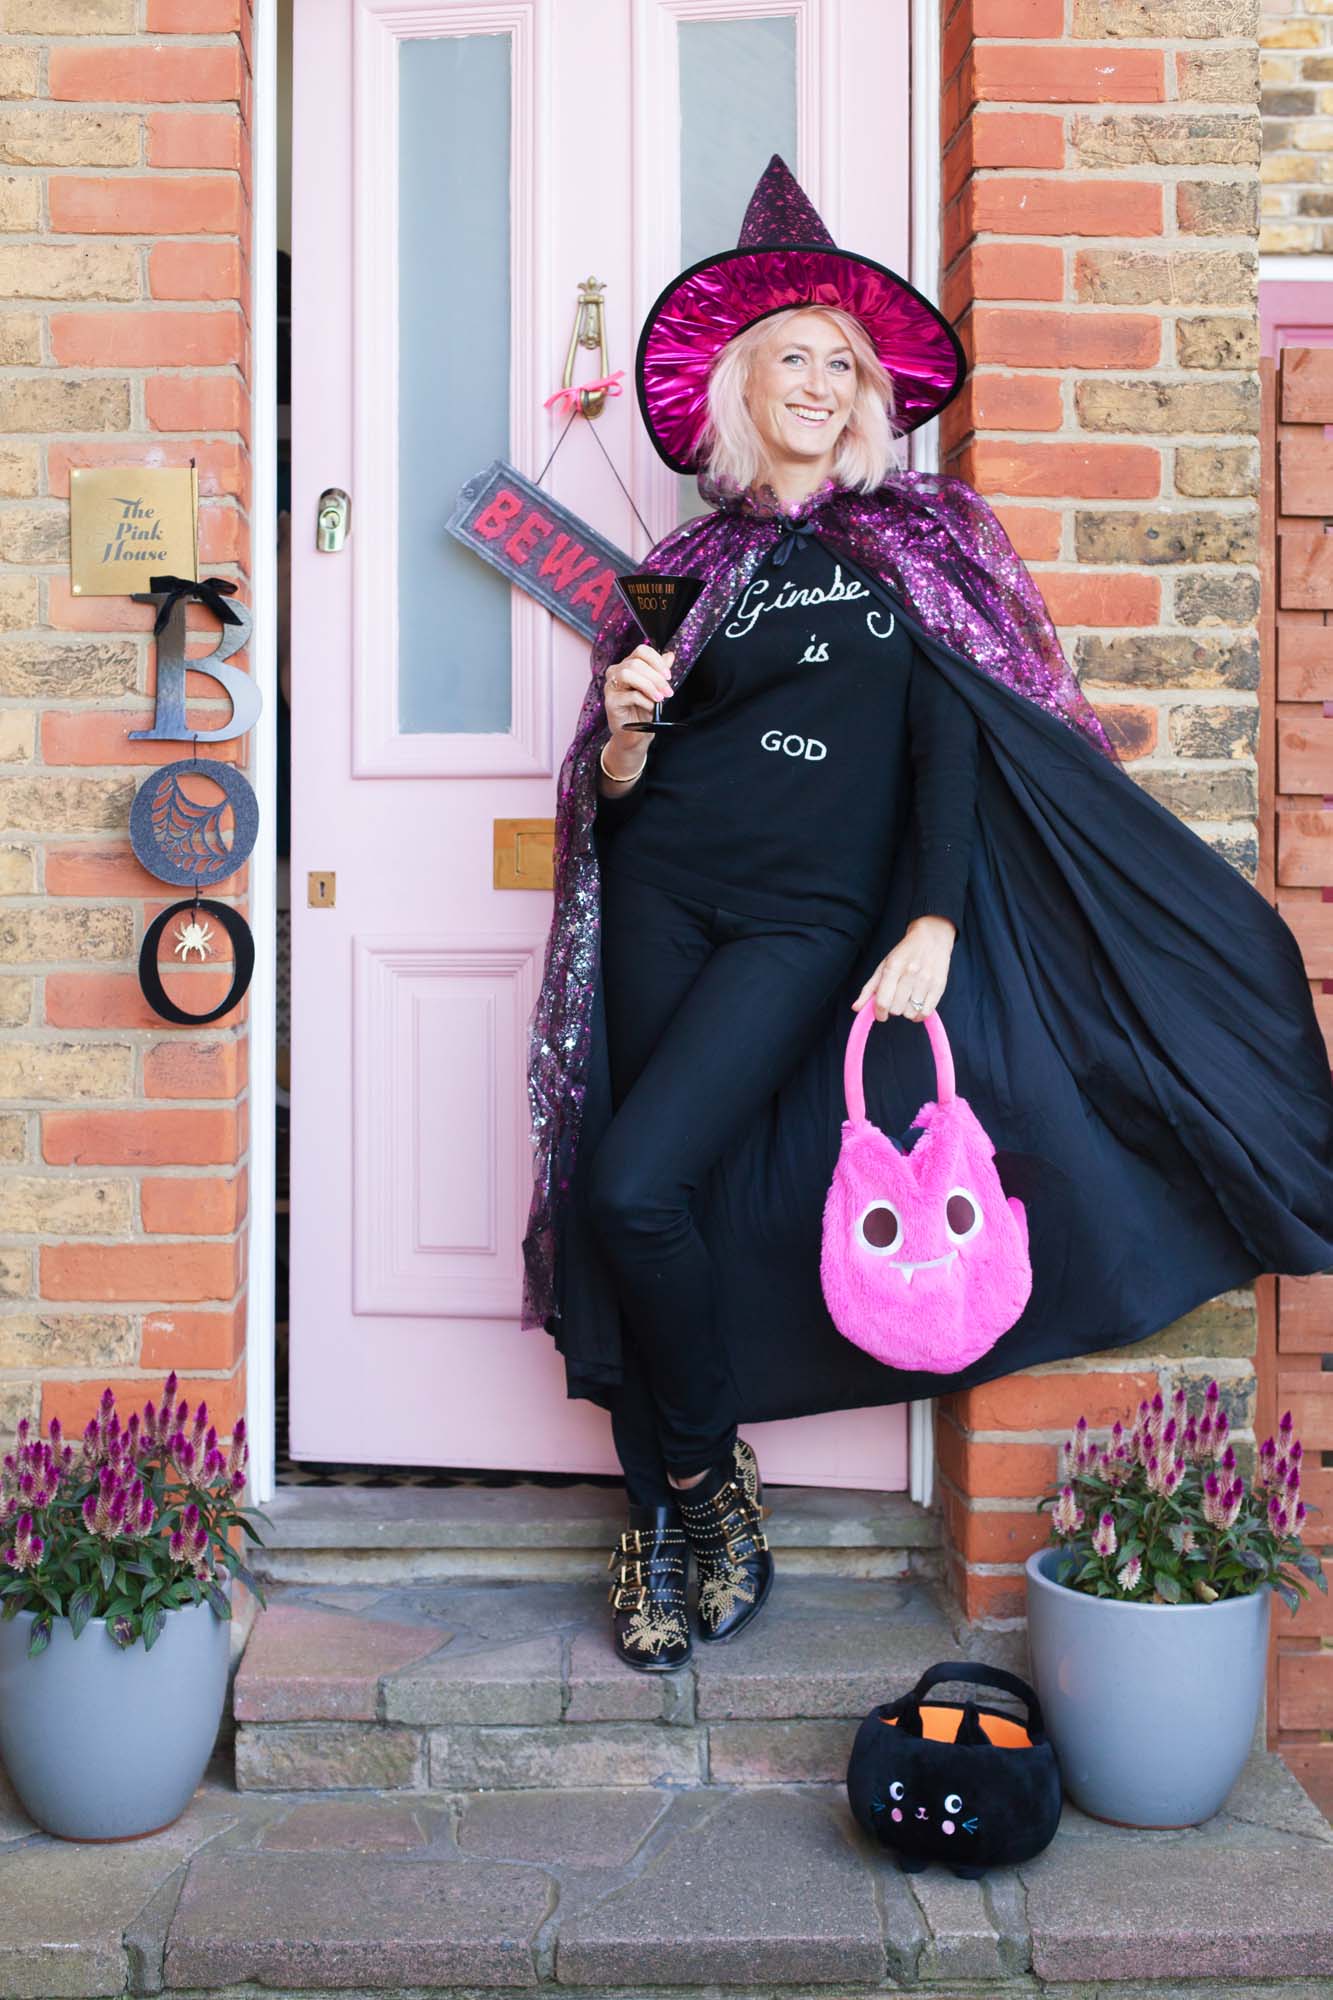 Emily Murray from The Pink House in a Sainsbury's Tu pink witch Halloween costume